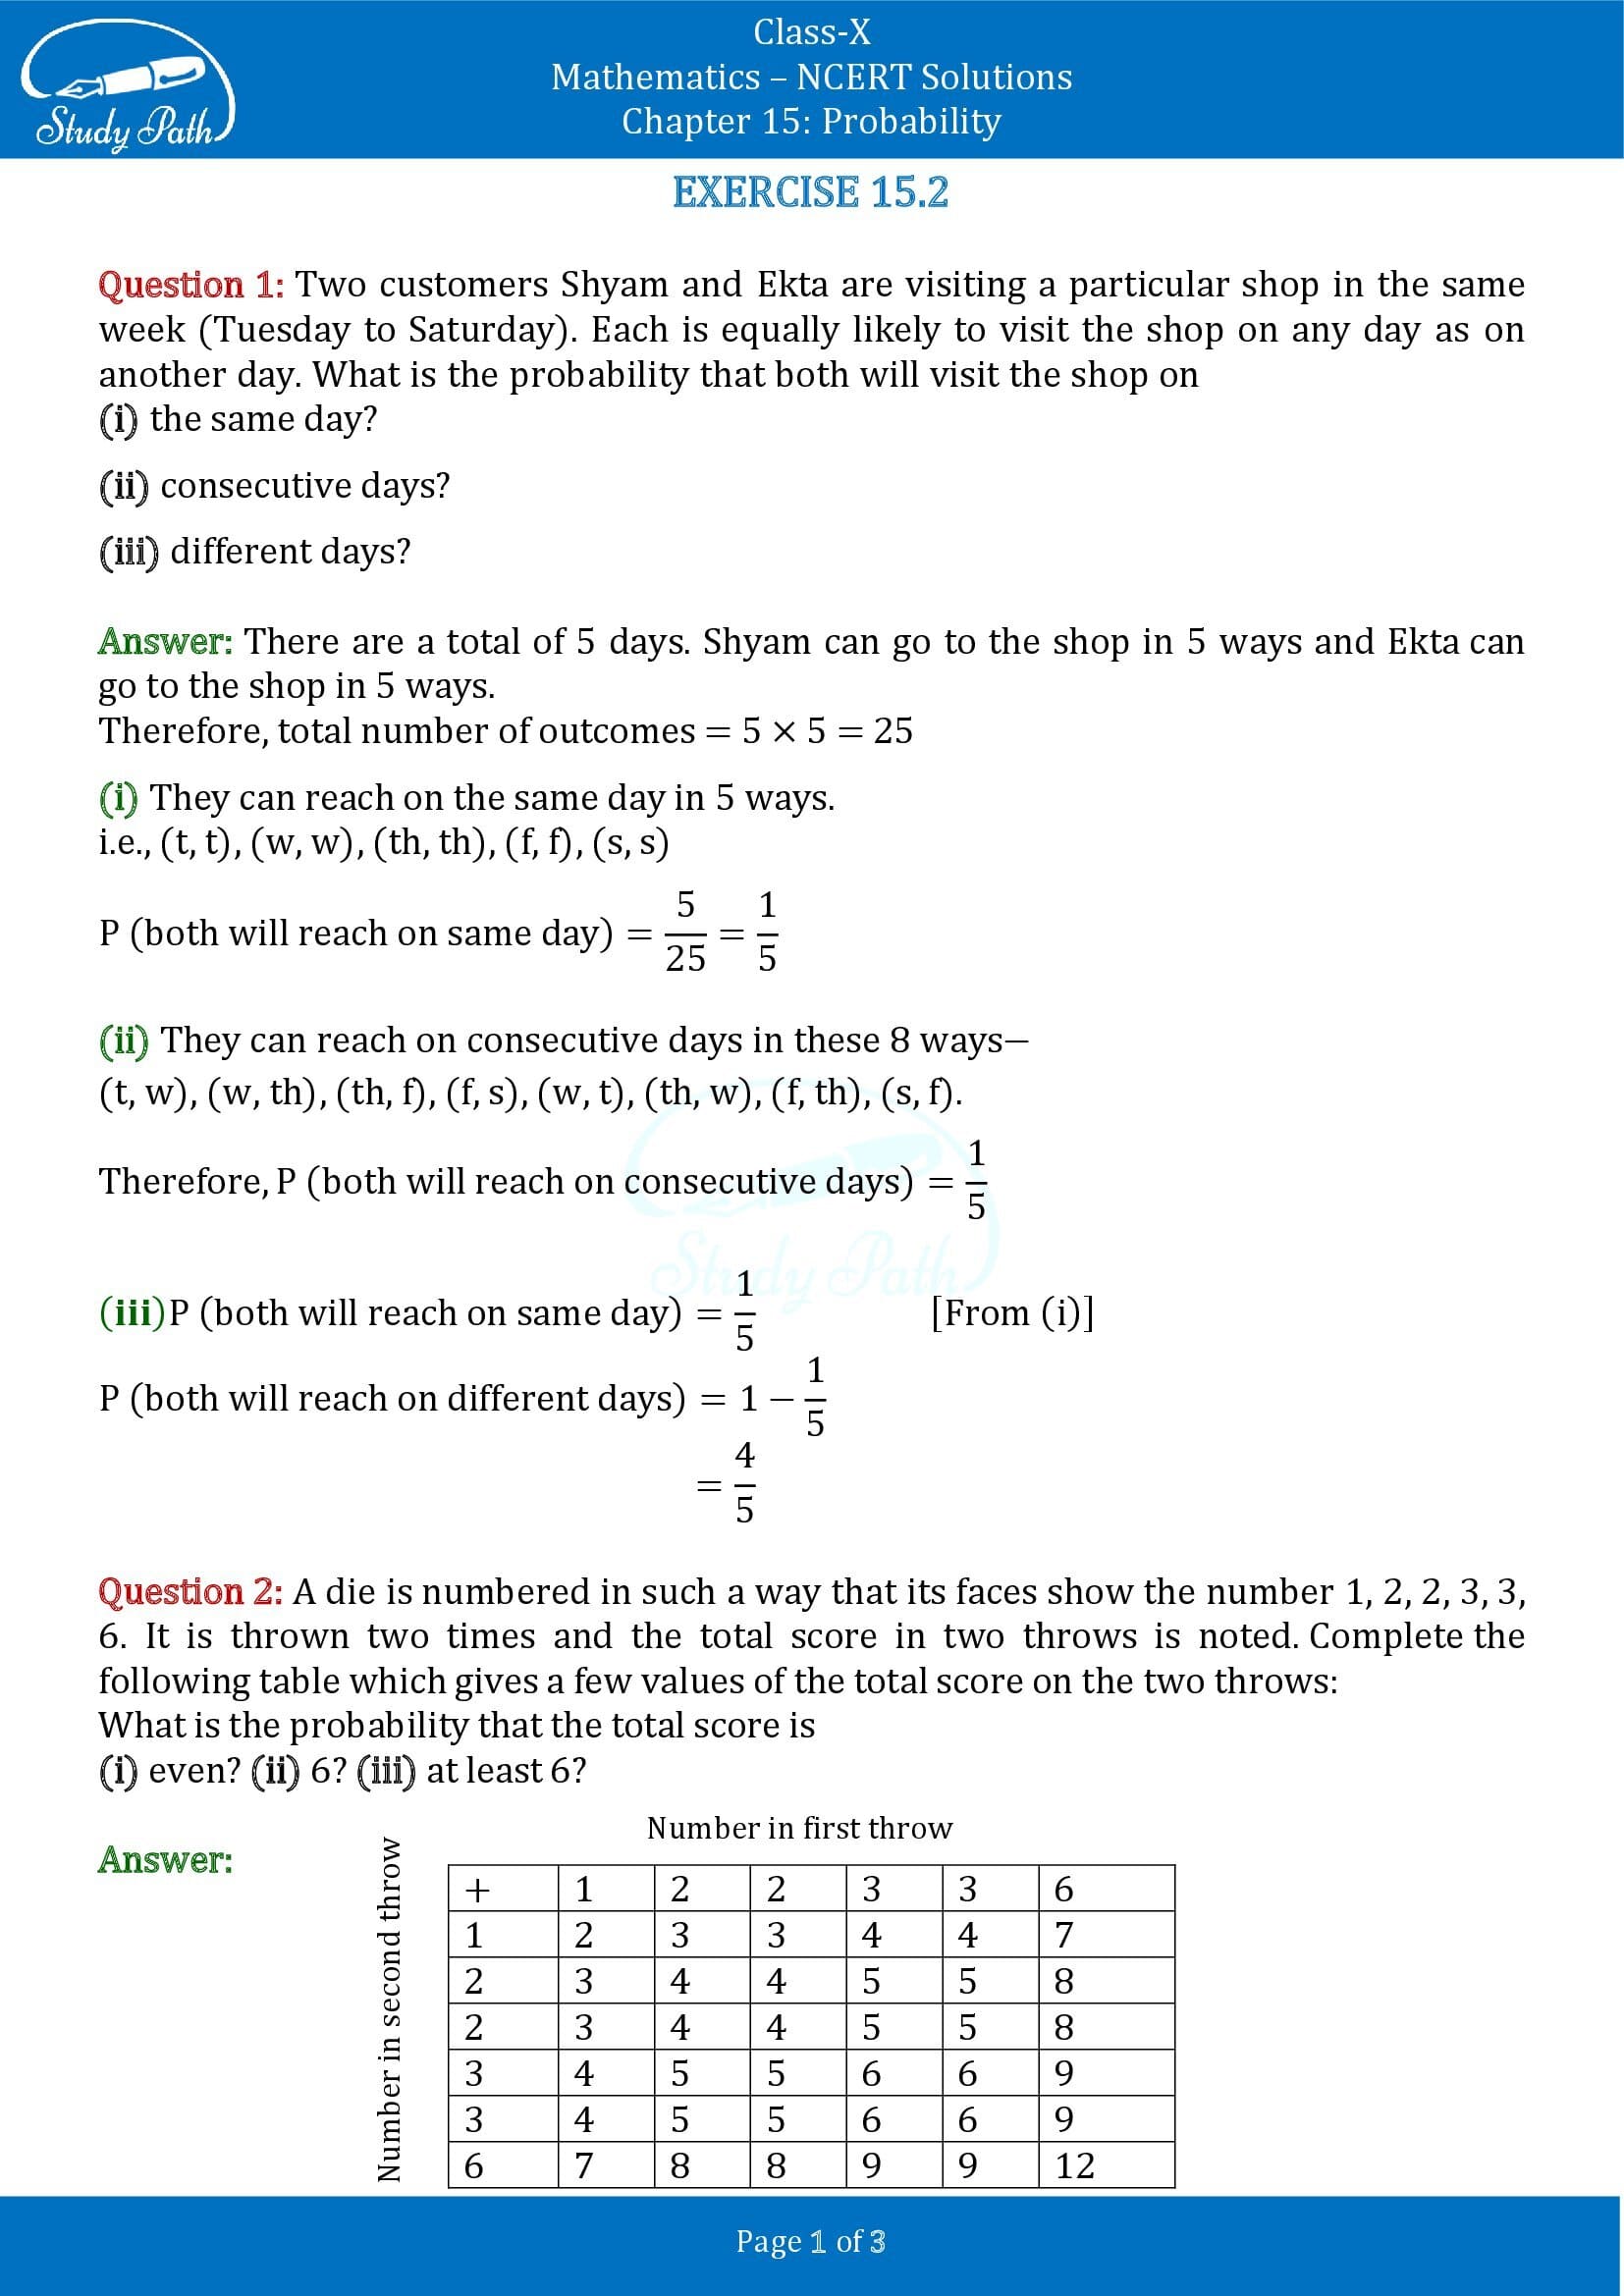 NCERT Solutions for Class 10 Maths Chapter 15 Probability Exercise 15.2 00001